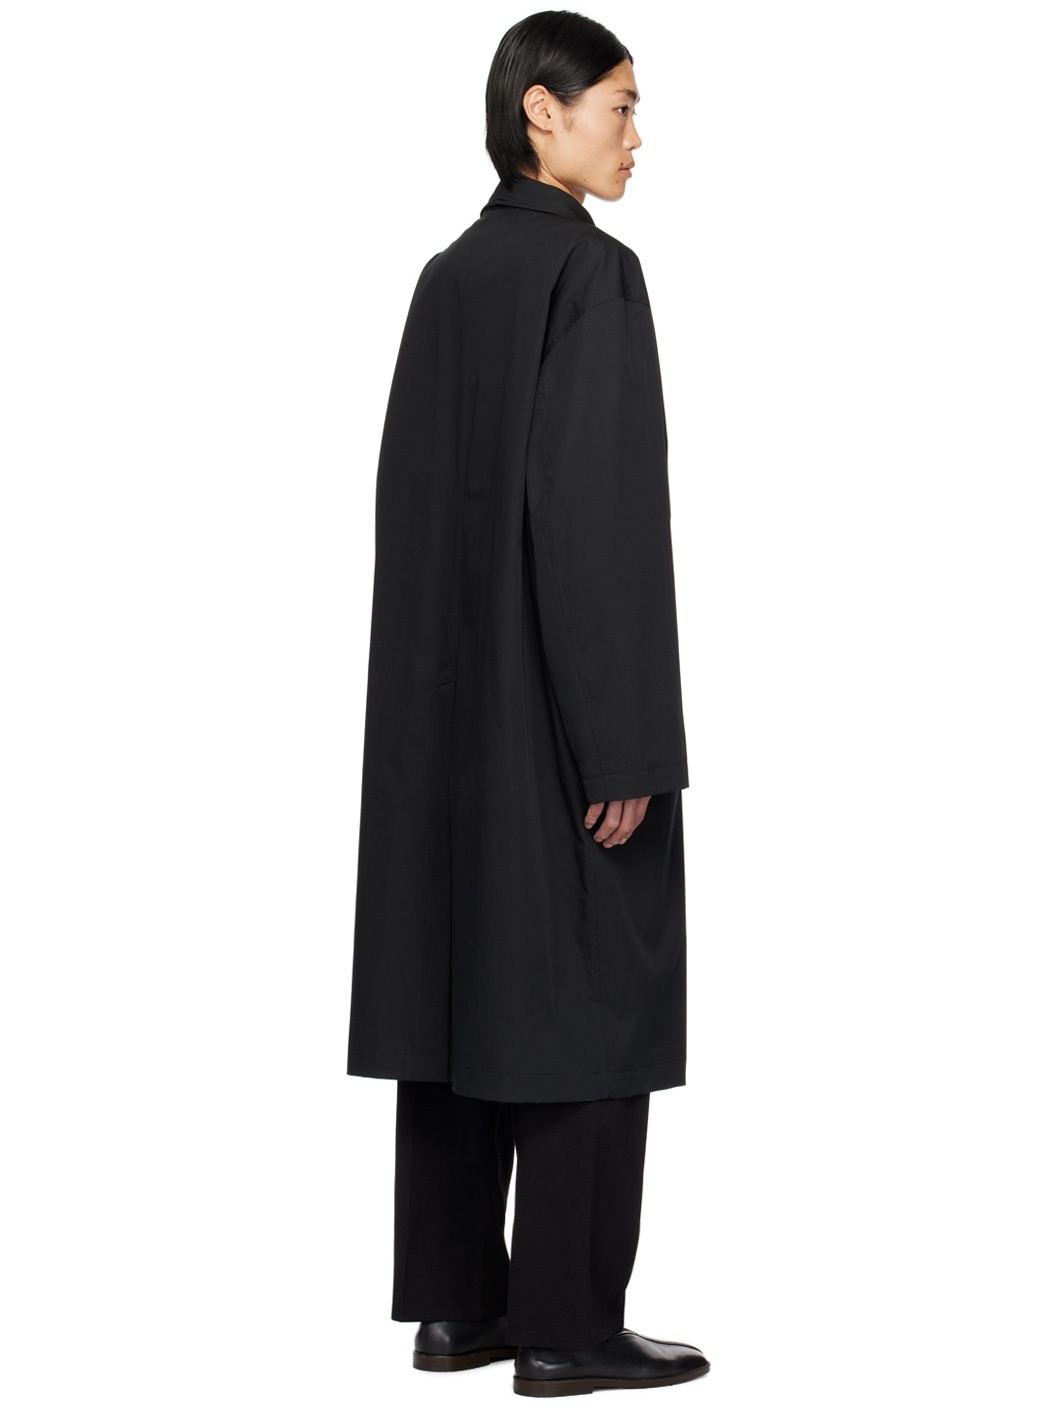 Lemaire Black Wrap Collar Trench Coat | REVERSIBLE